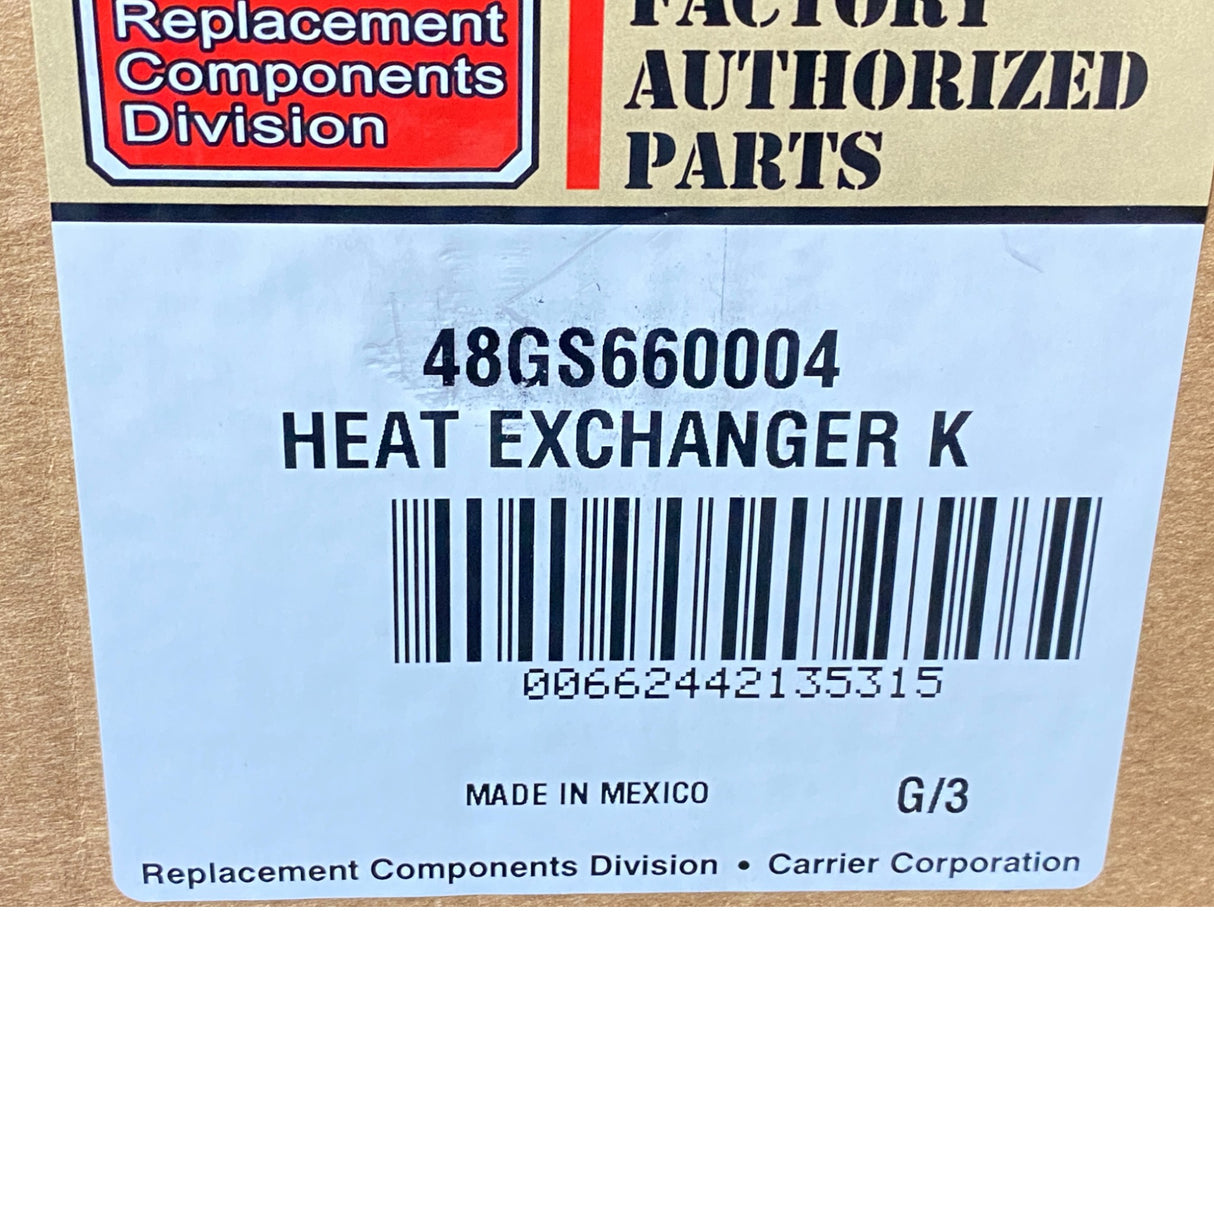 48GS660004 Factory Authorized Parts Head Exchanger Kit